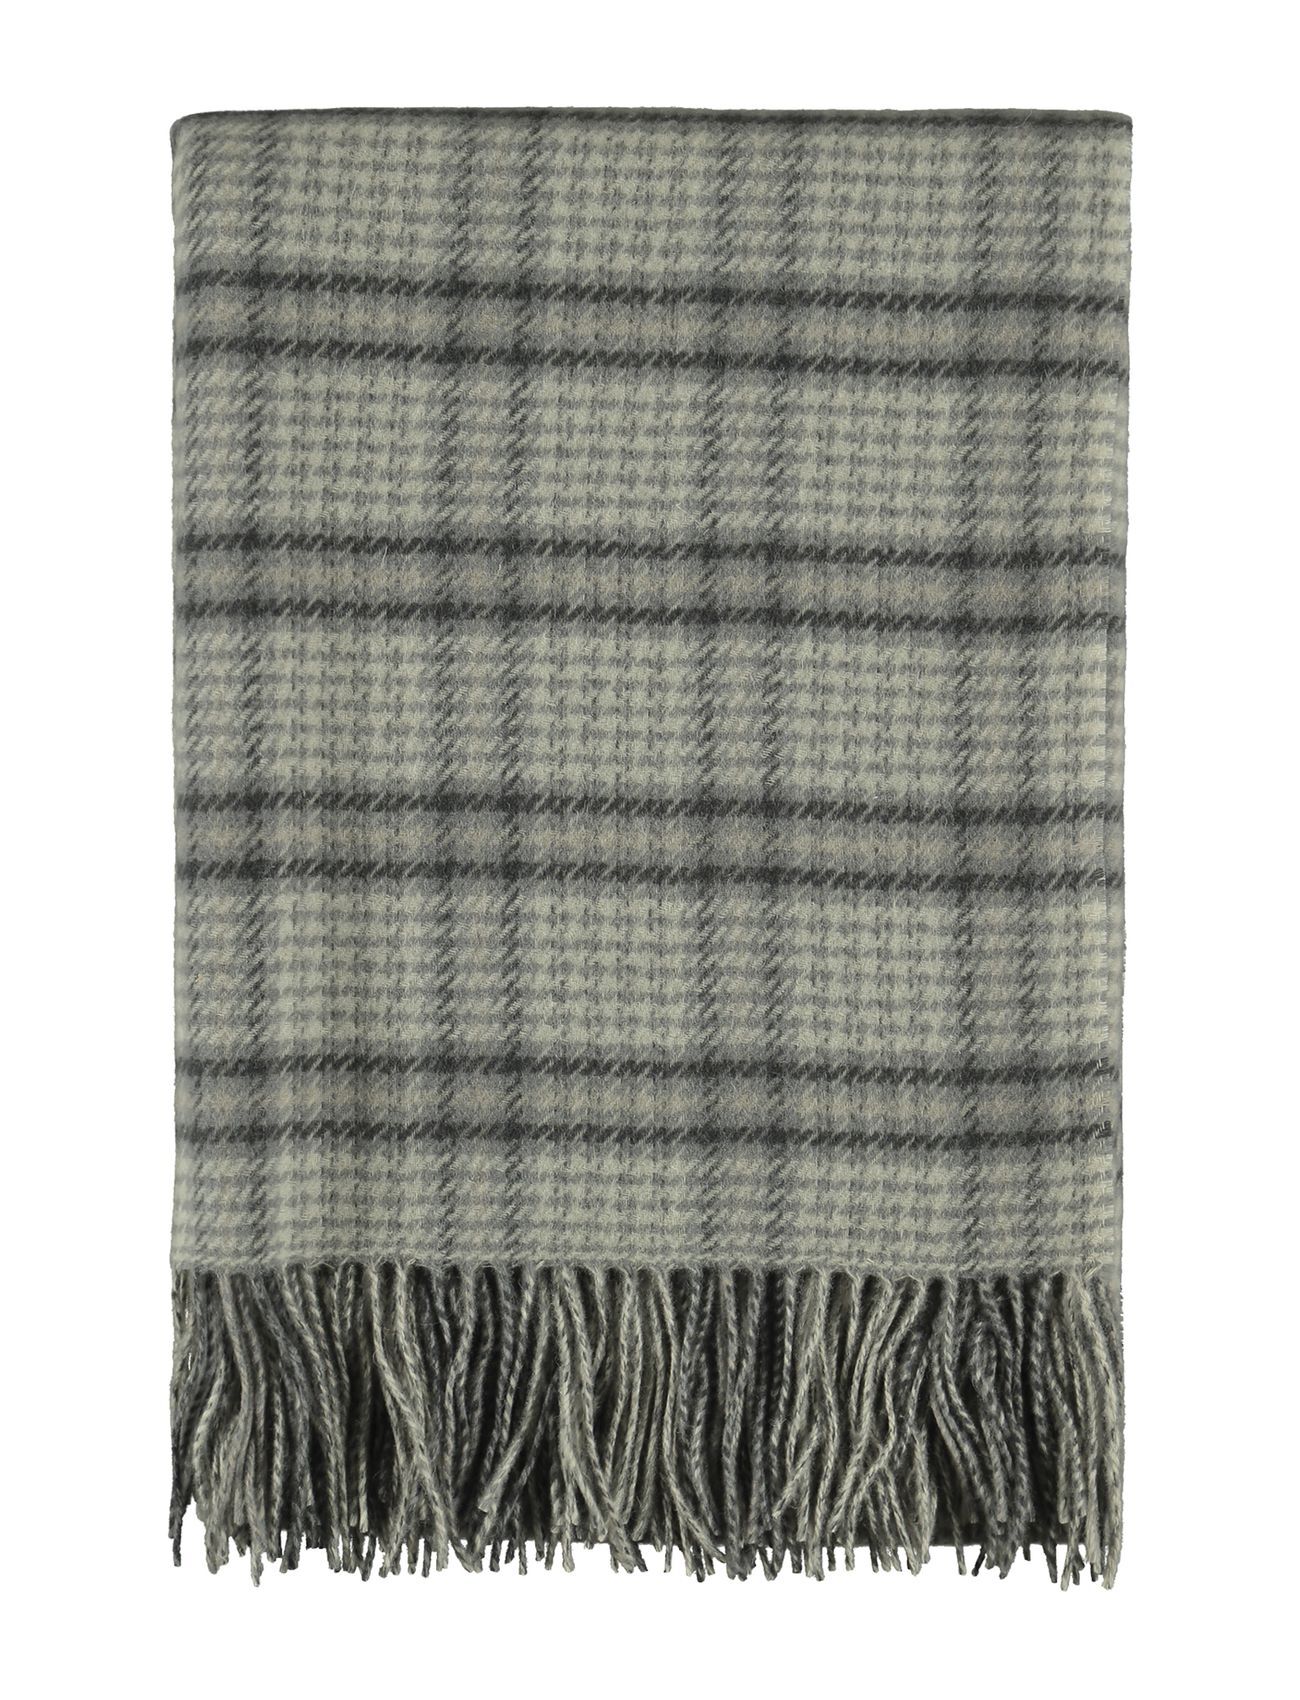 Gripsholm Throw Wool Check Home Textiles Cushions & Blankets Blankets & Throws Grå Gripsholm